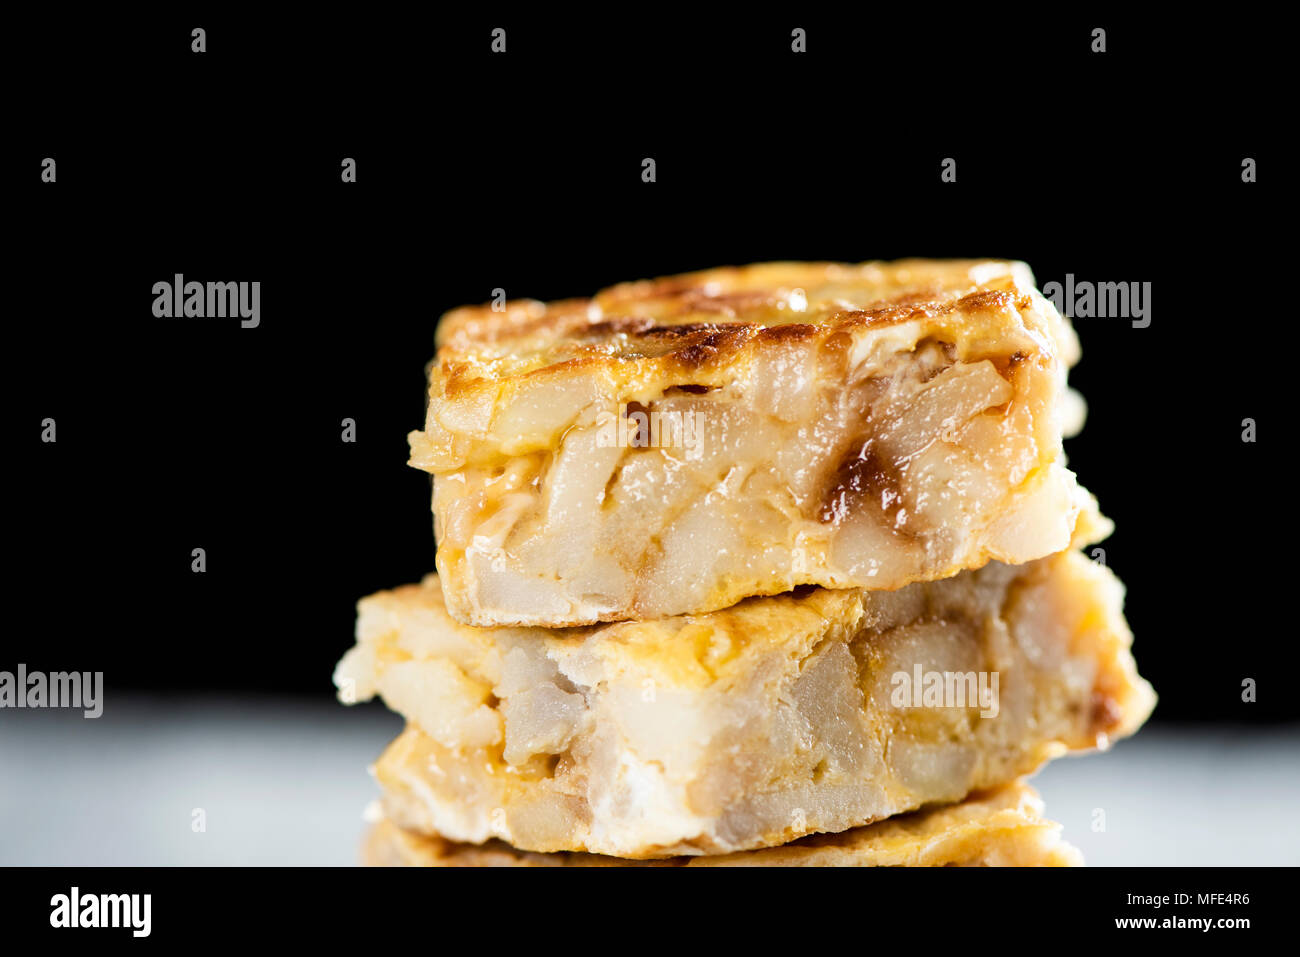 closeup of some pieces of typical tortilla de patatas, spanish omelet, on a rustic wooden table, against a black background Stock Photo